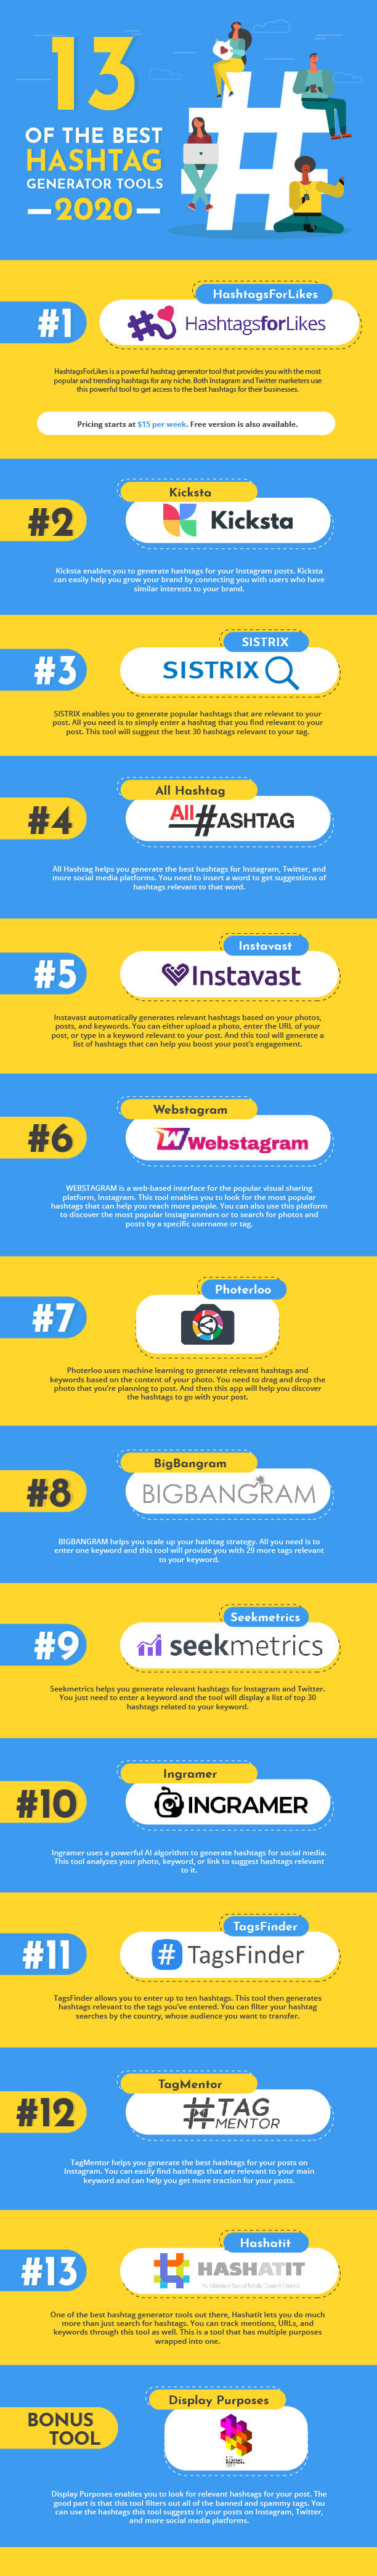 The Best Instagram-Hashtag Generator Tools You Can Use